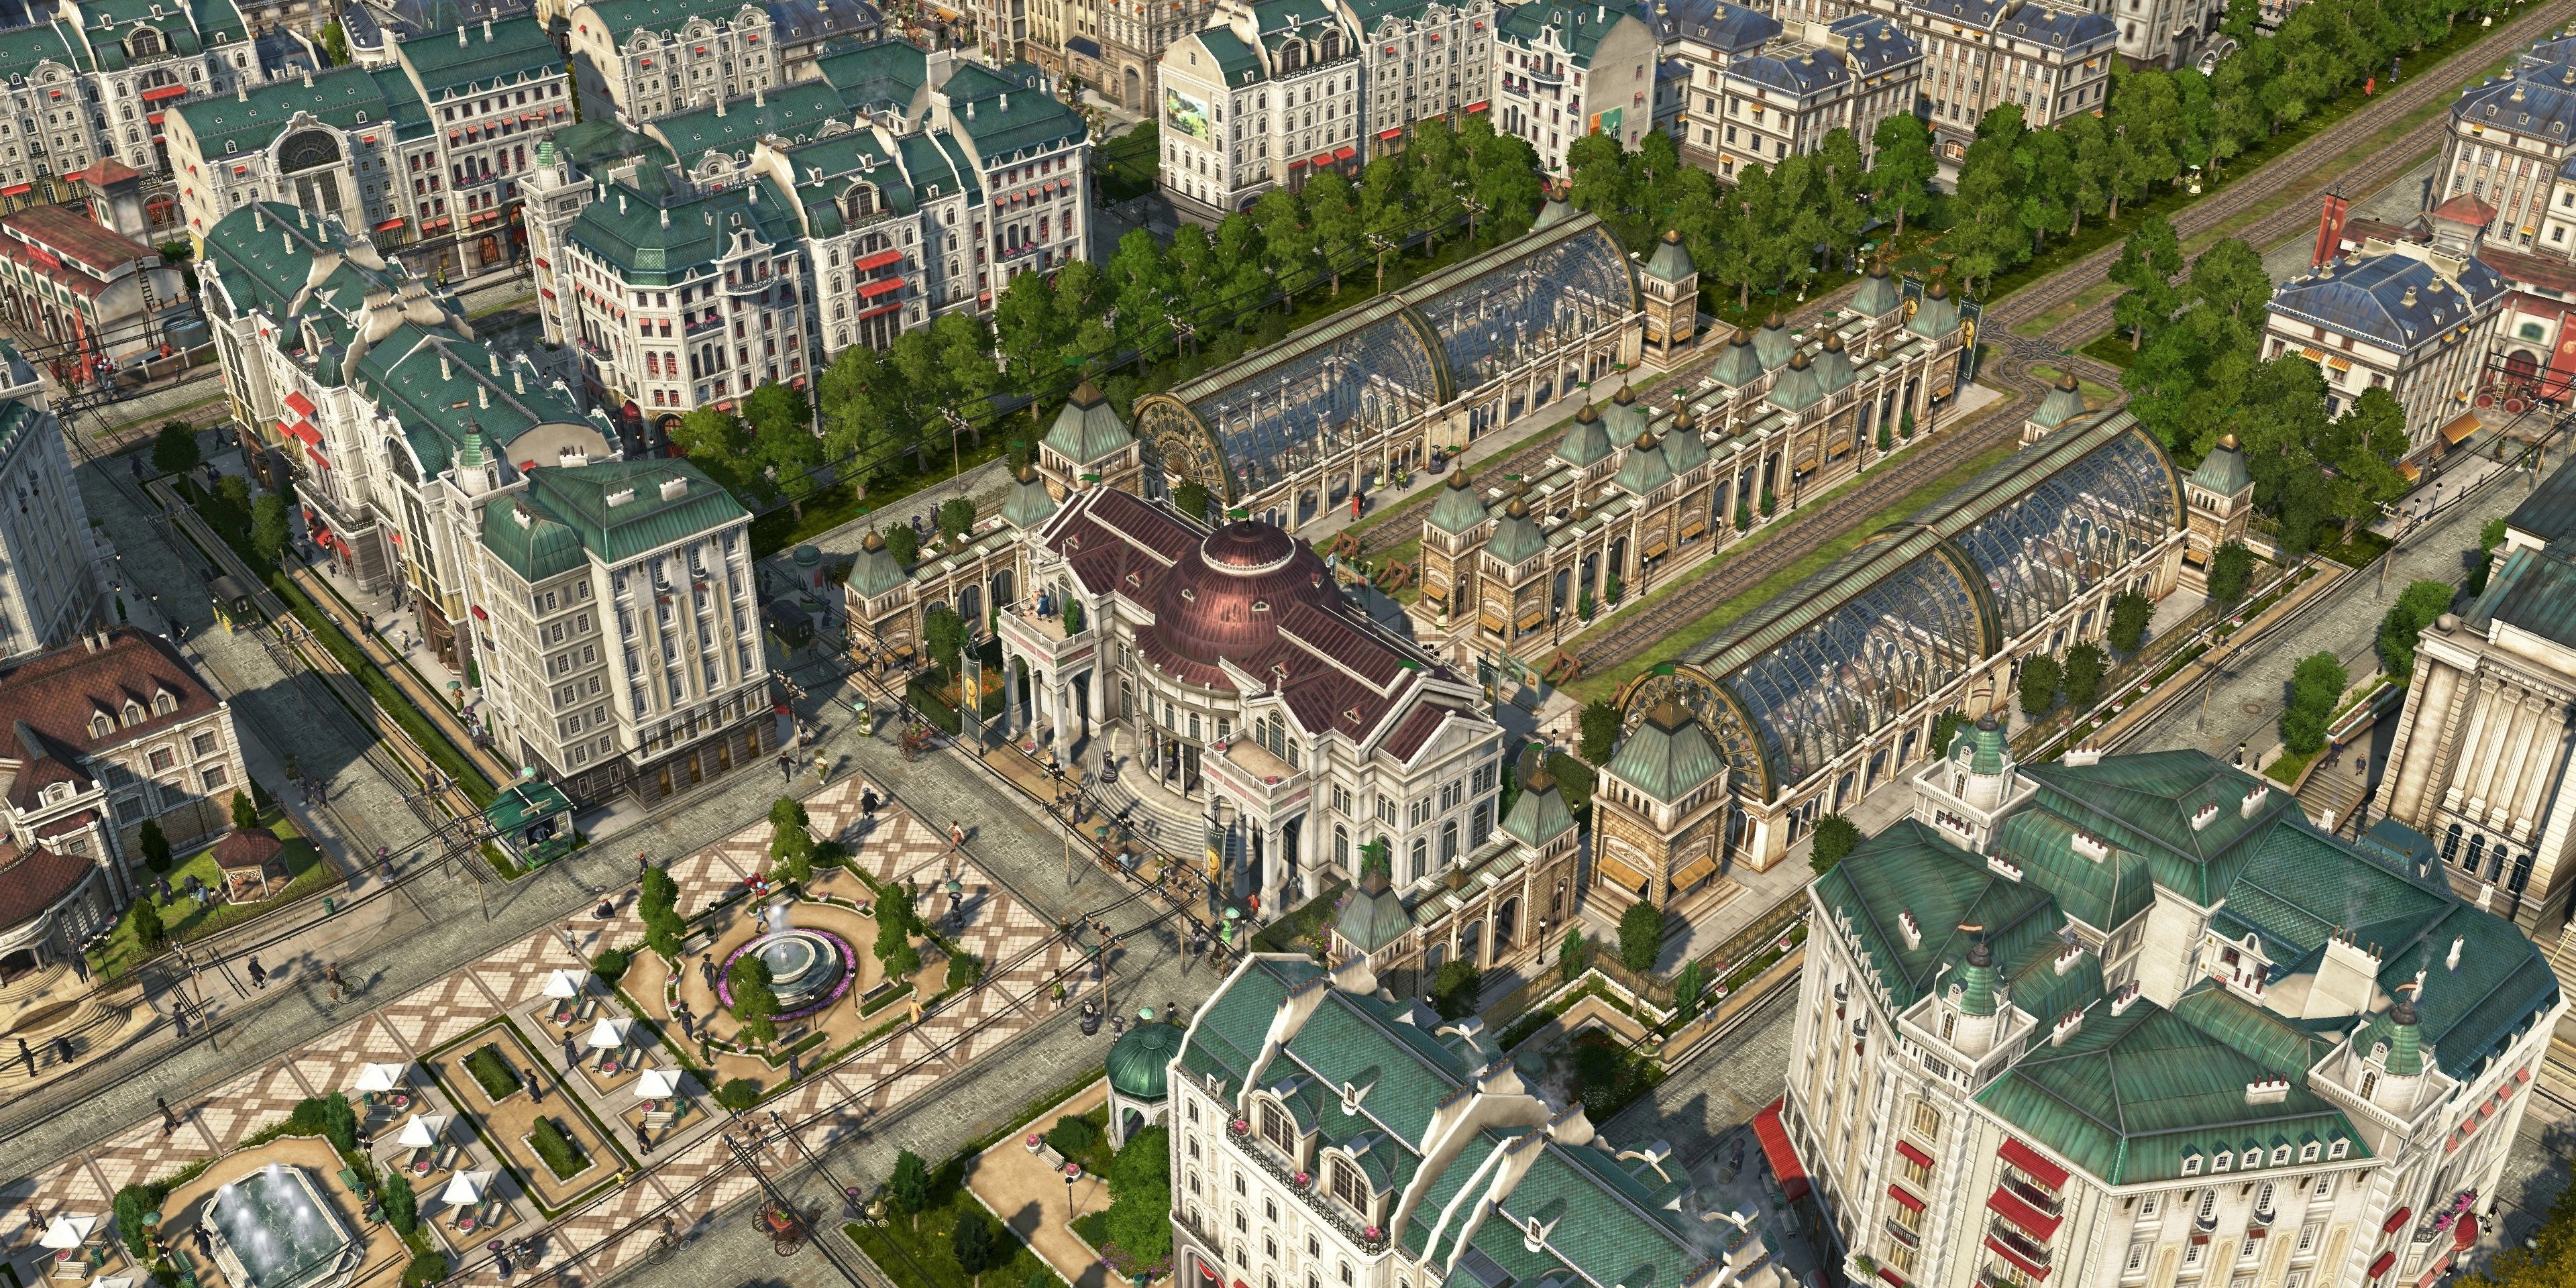 Train-Stations And Hotels mod in Anno 1800